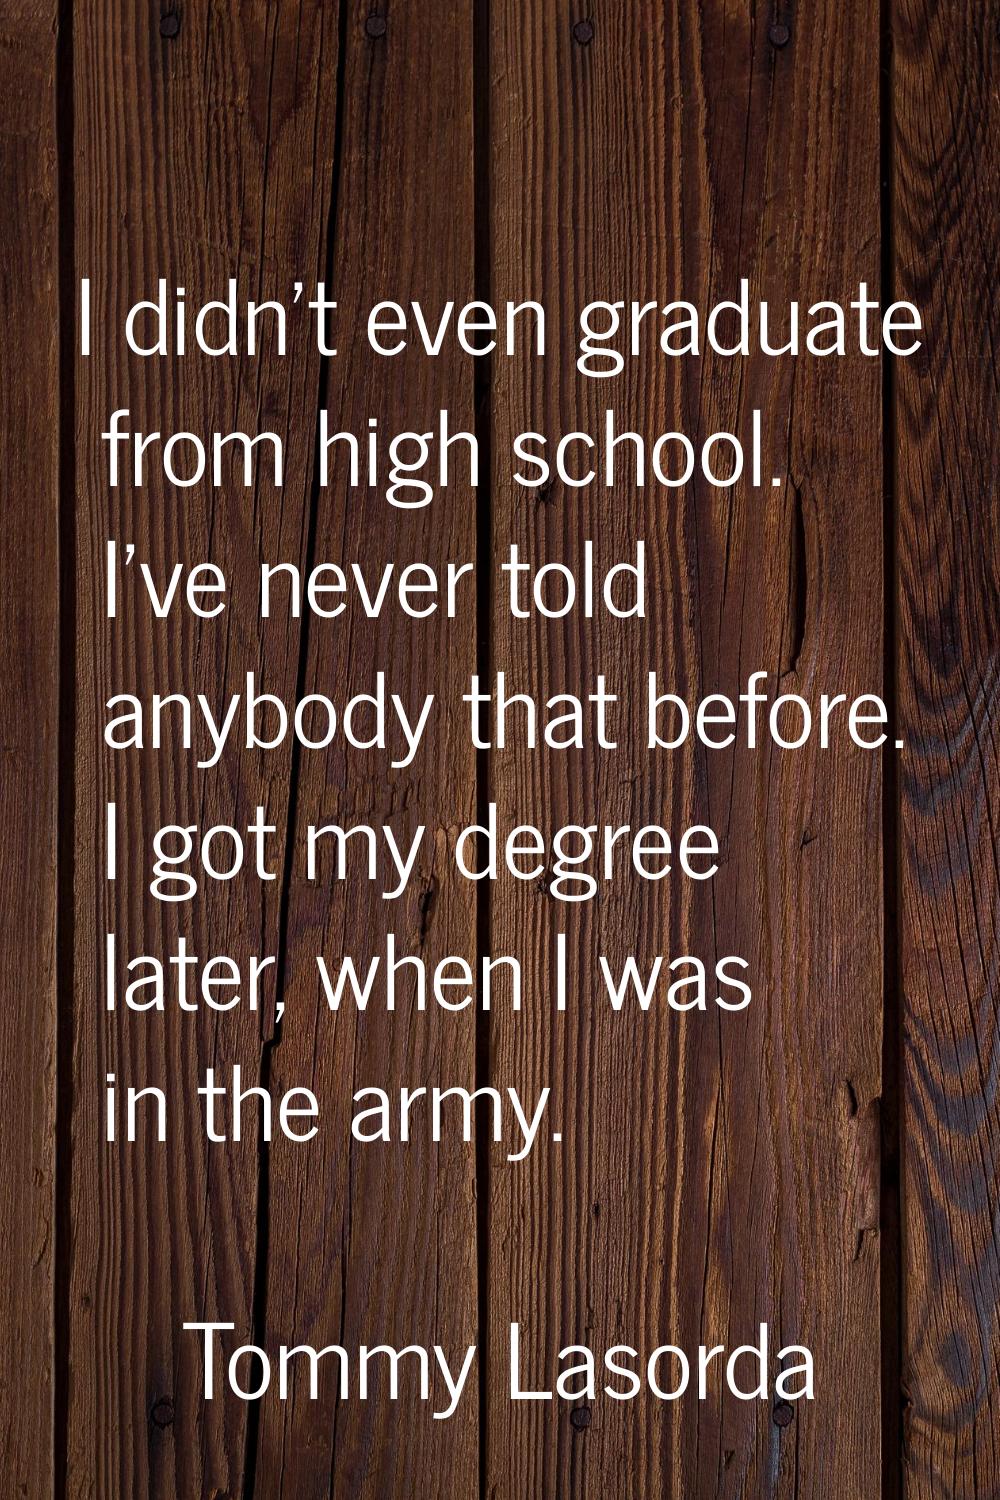 I didn't even graduate from high school. I've never told anybody that before. I got my degree later